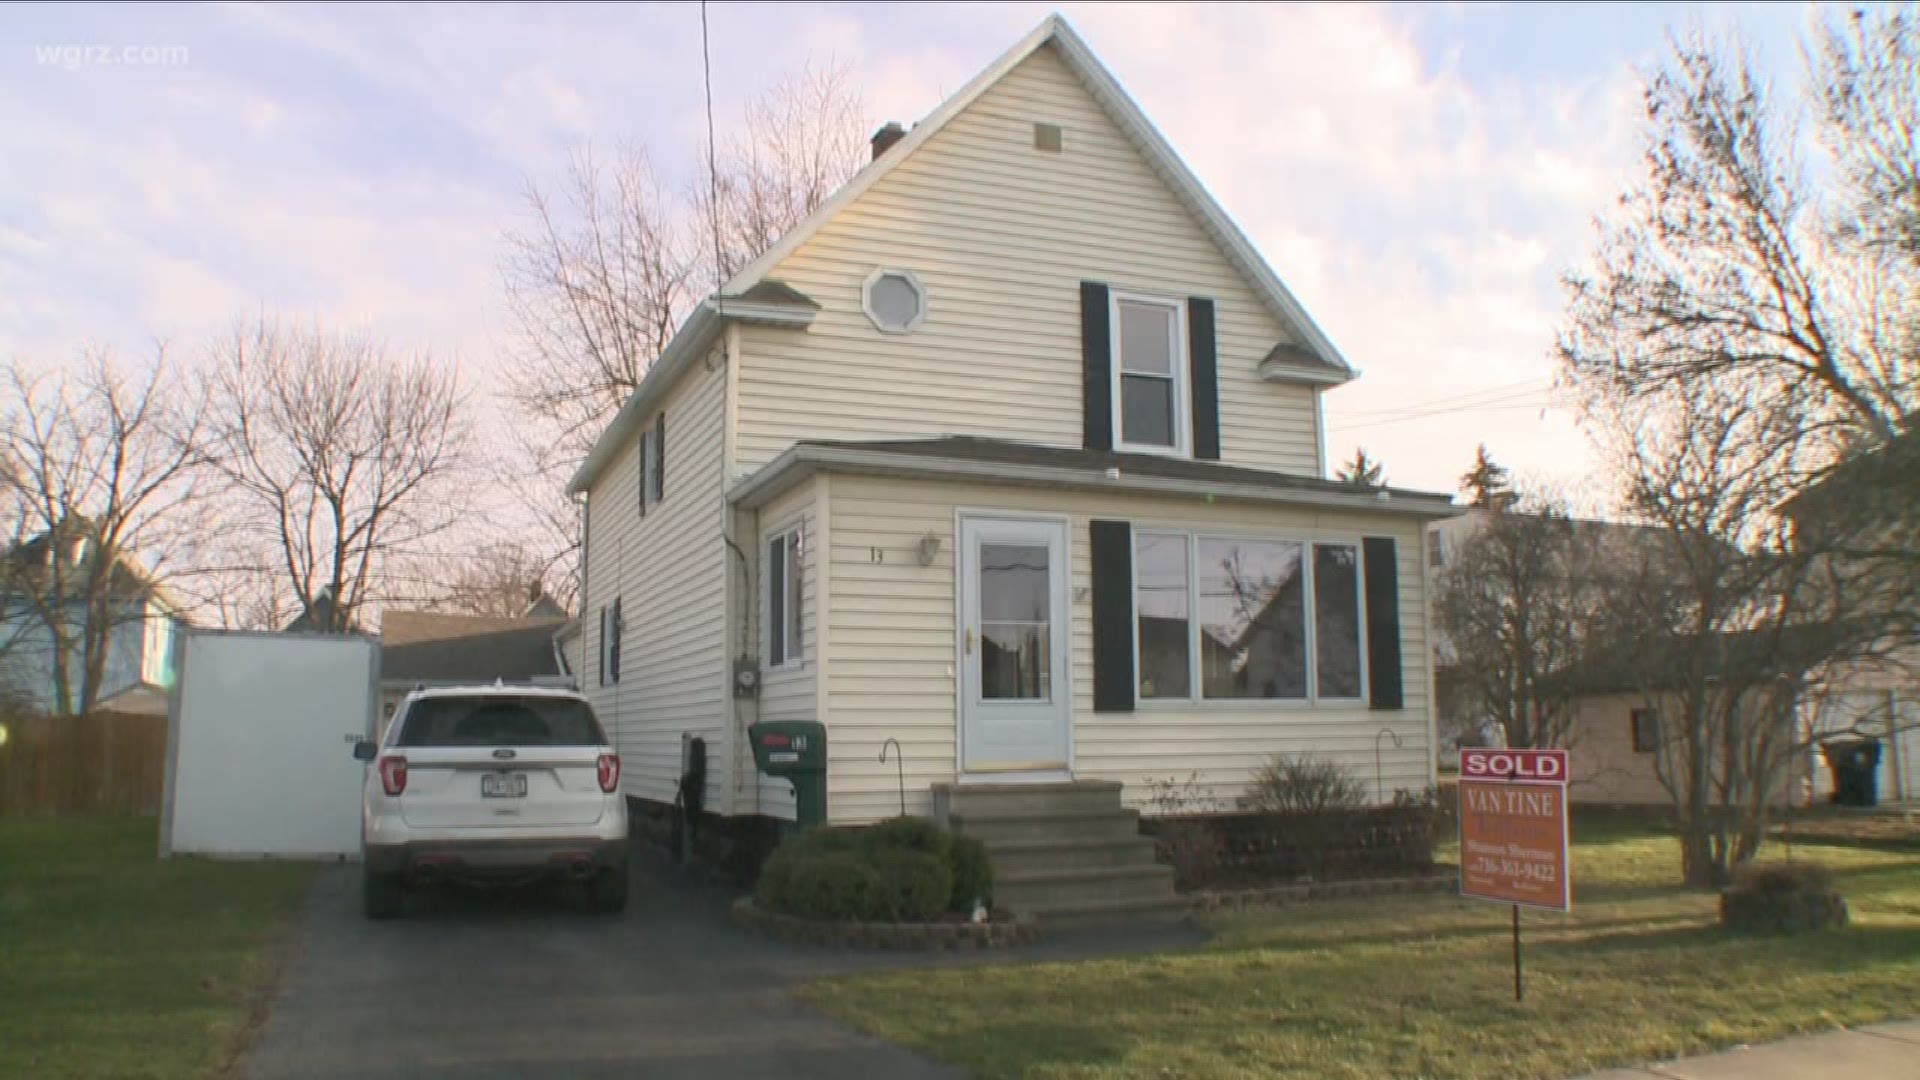 Difficult to find homes to buy in WNY